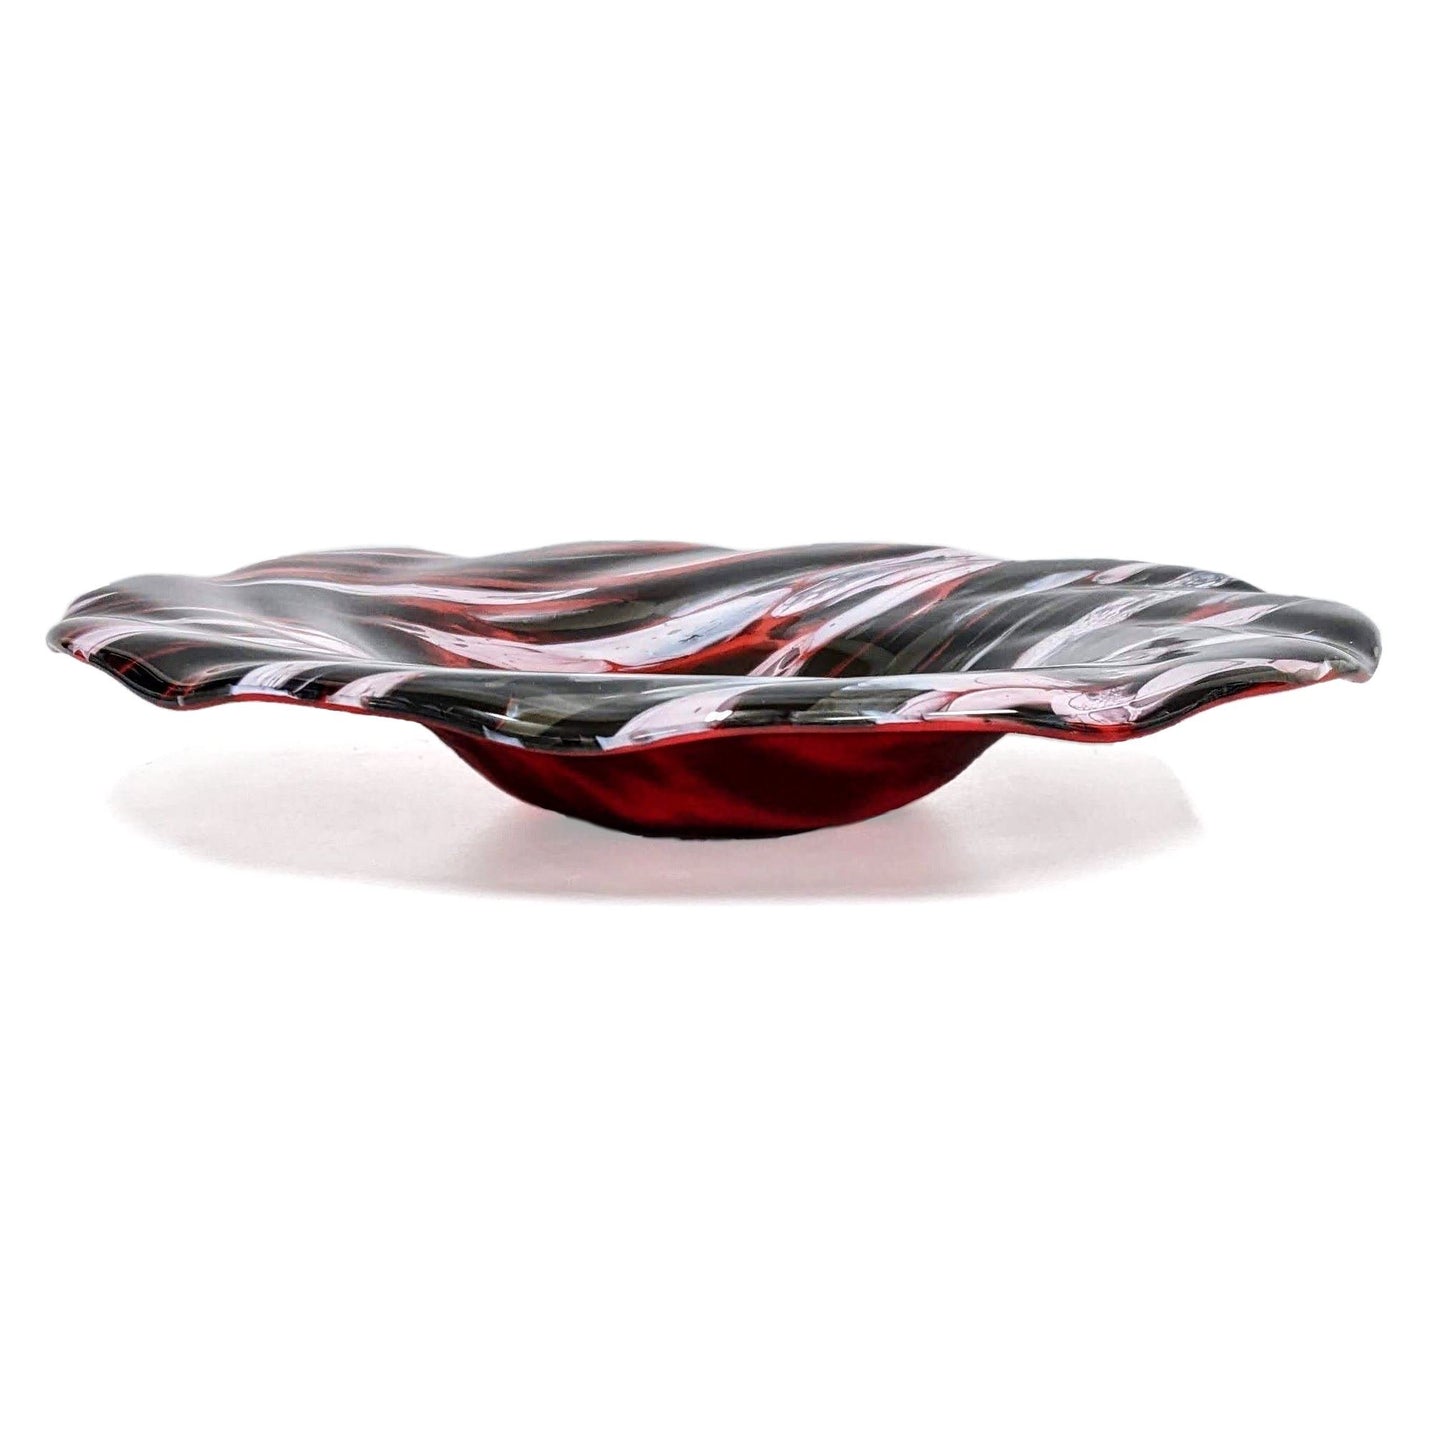 Modern Decorative Glass Art Bowl in Red Black and White